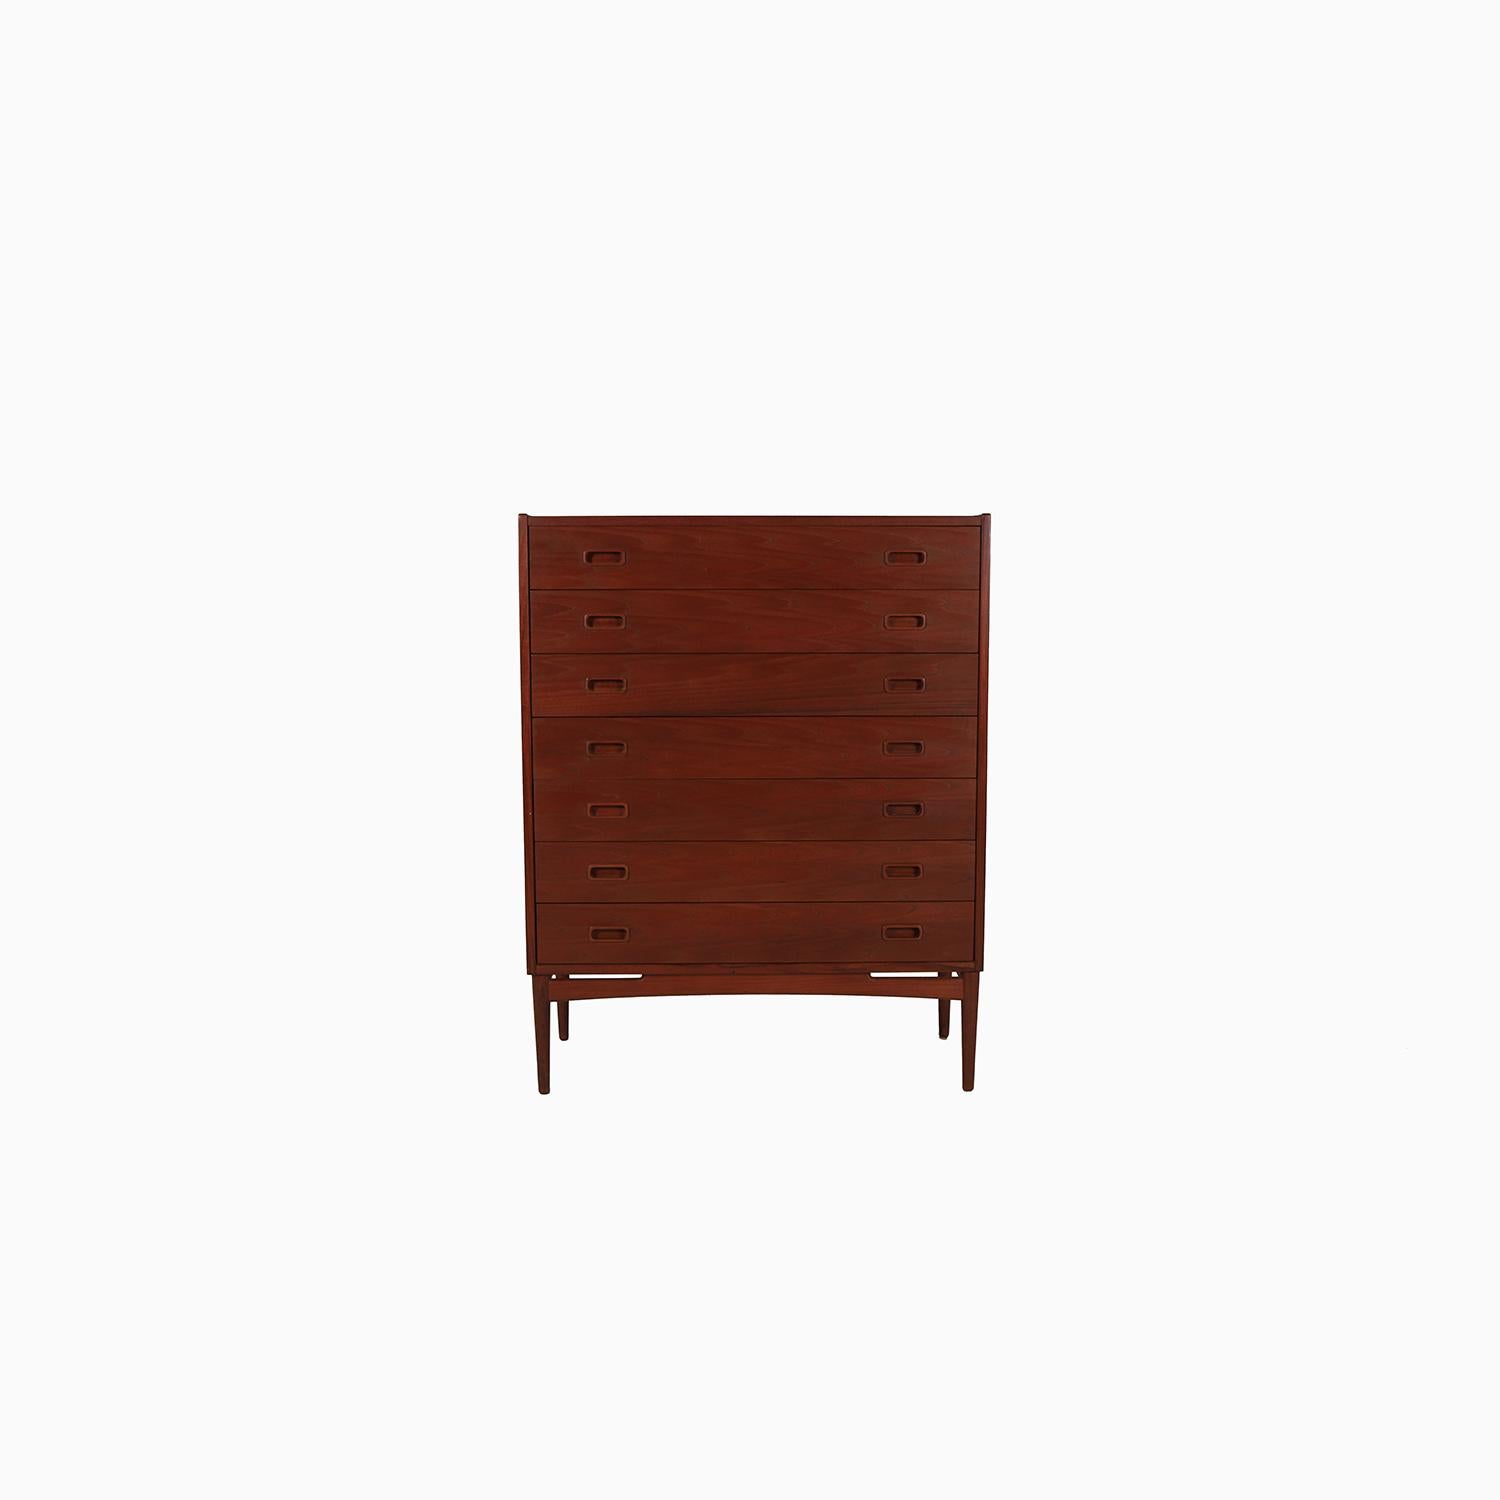 

This elegant Scandinavian modern drawer chest boasts 7 drawers (shallow by today's standards) with sculptural rectangular finger pulls.  It Is made from old growth teak with a traditional oil finish.  Boasting a lovely rich patina that has been